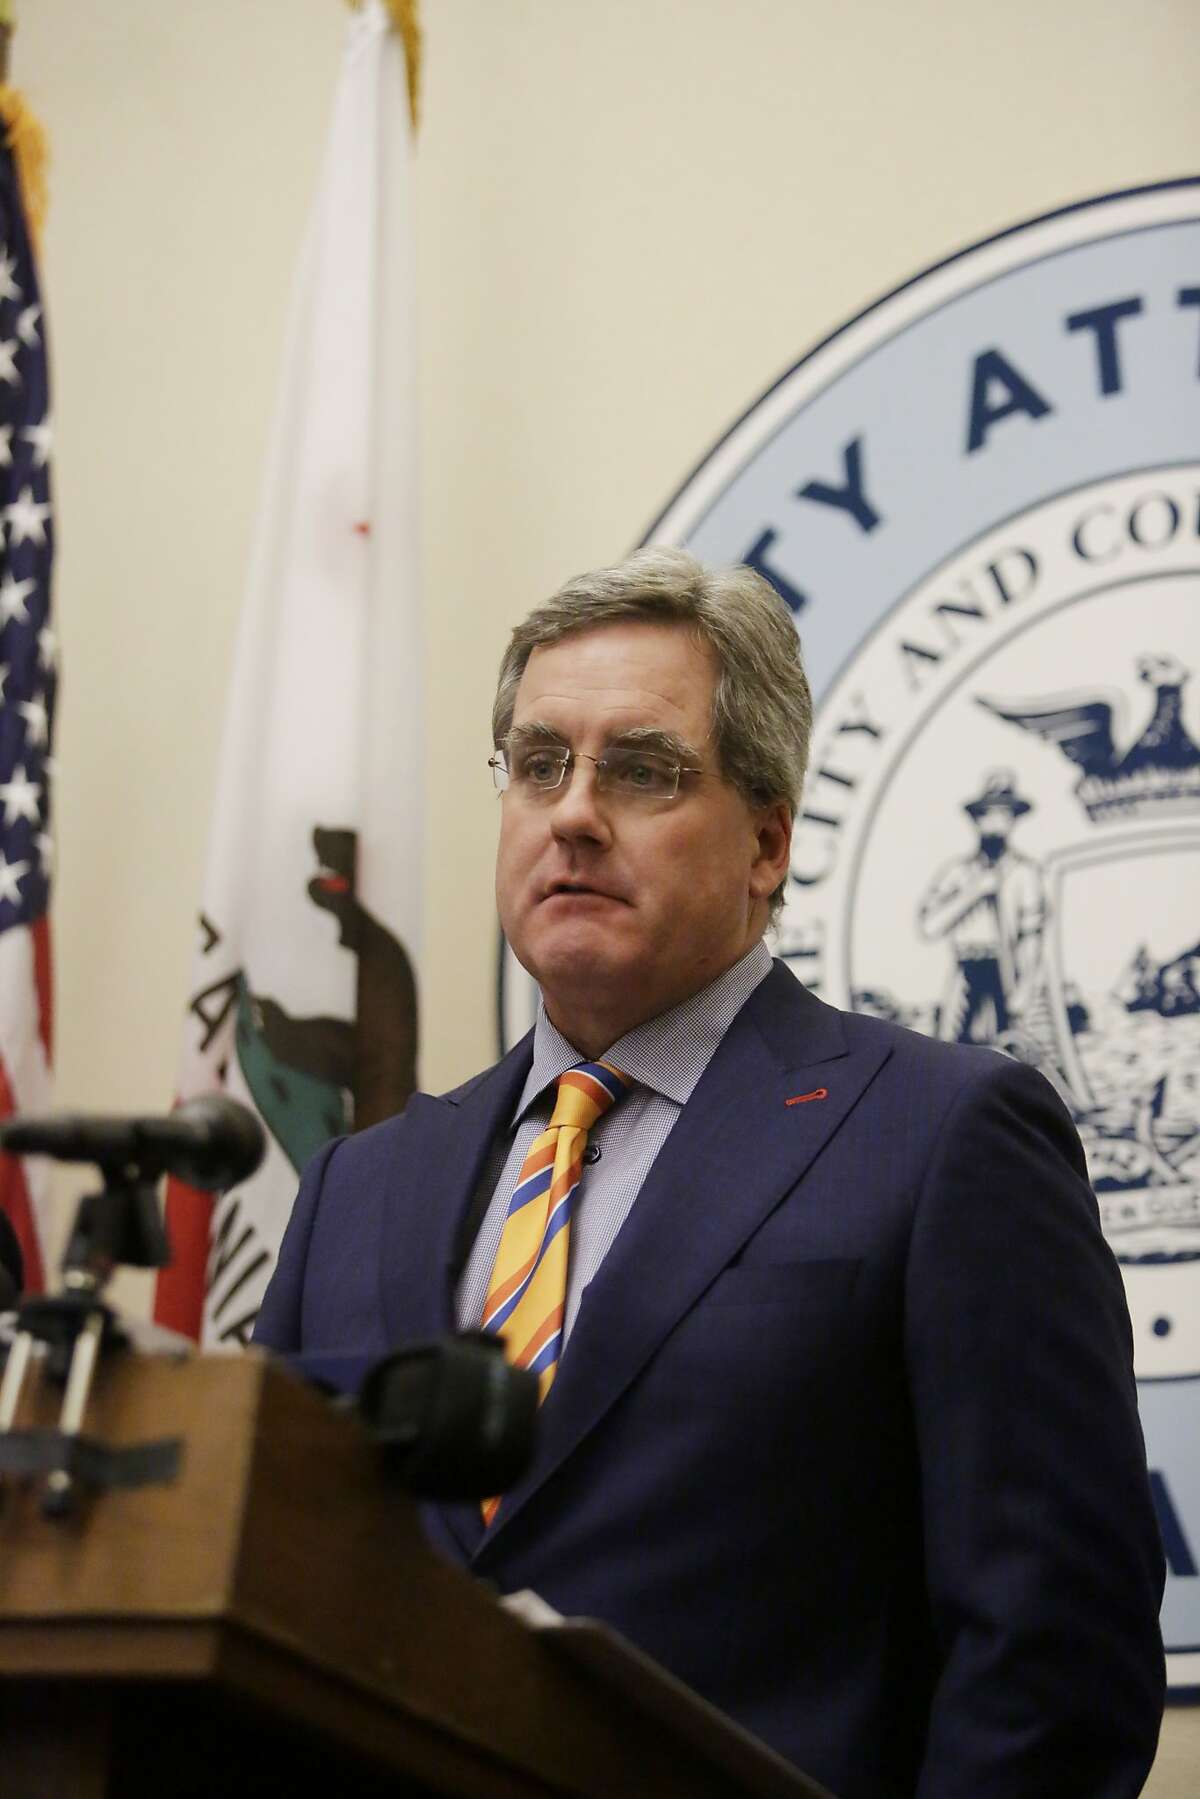 San Francisco City Attorney Dennis Hererra called the ruling “a victory for the rule of law.”